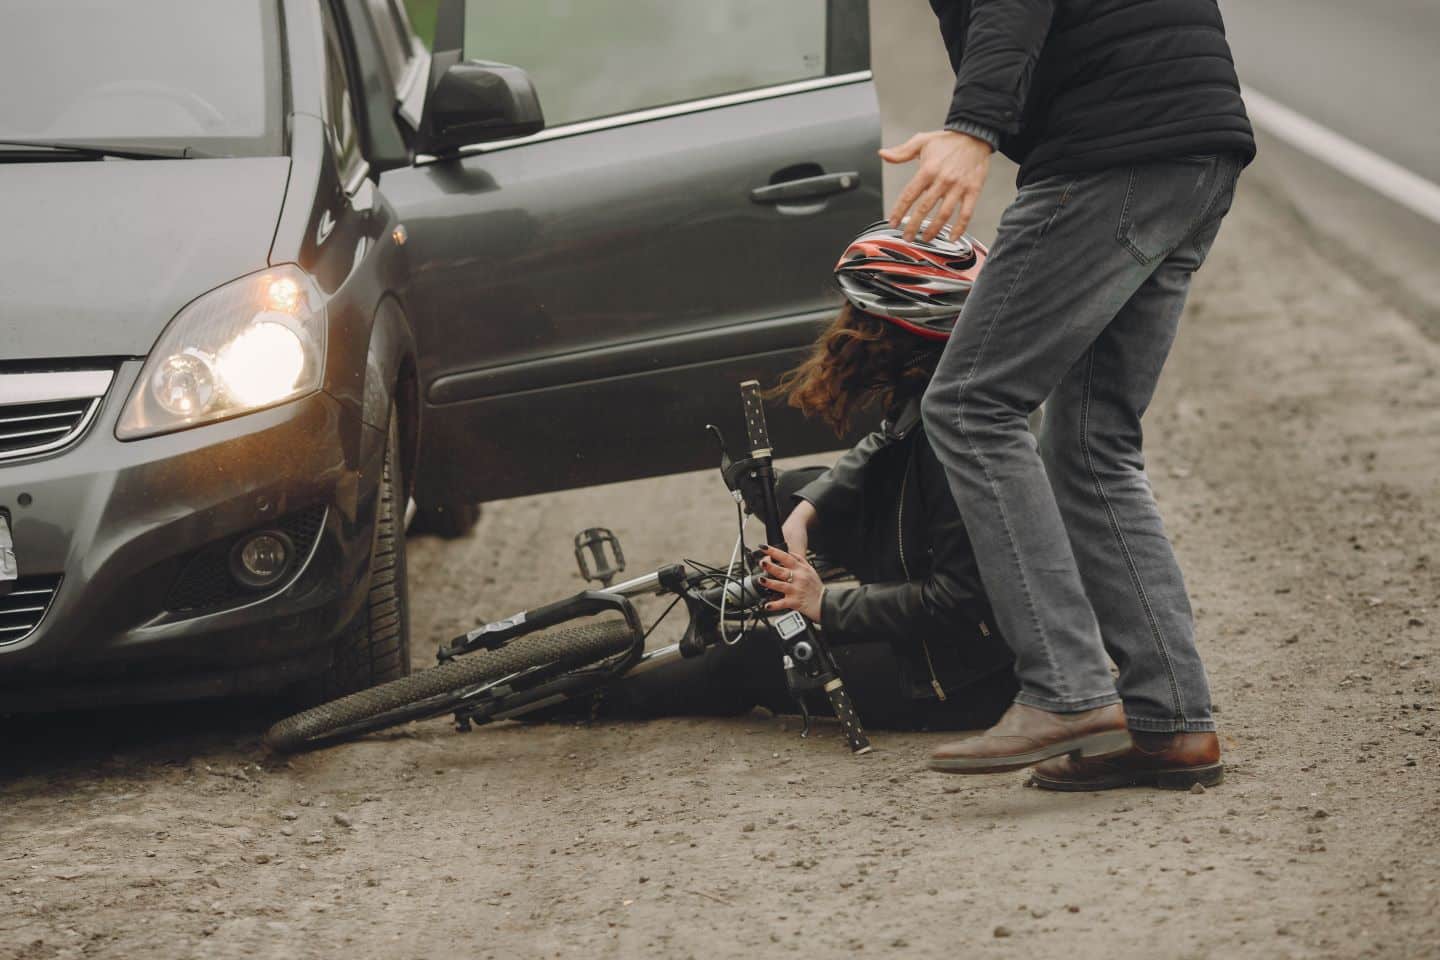 Missouri bicycle accident laws